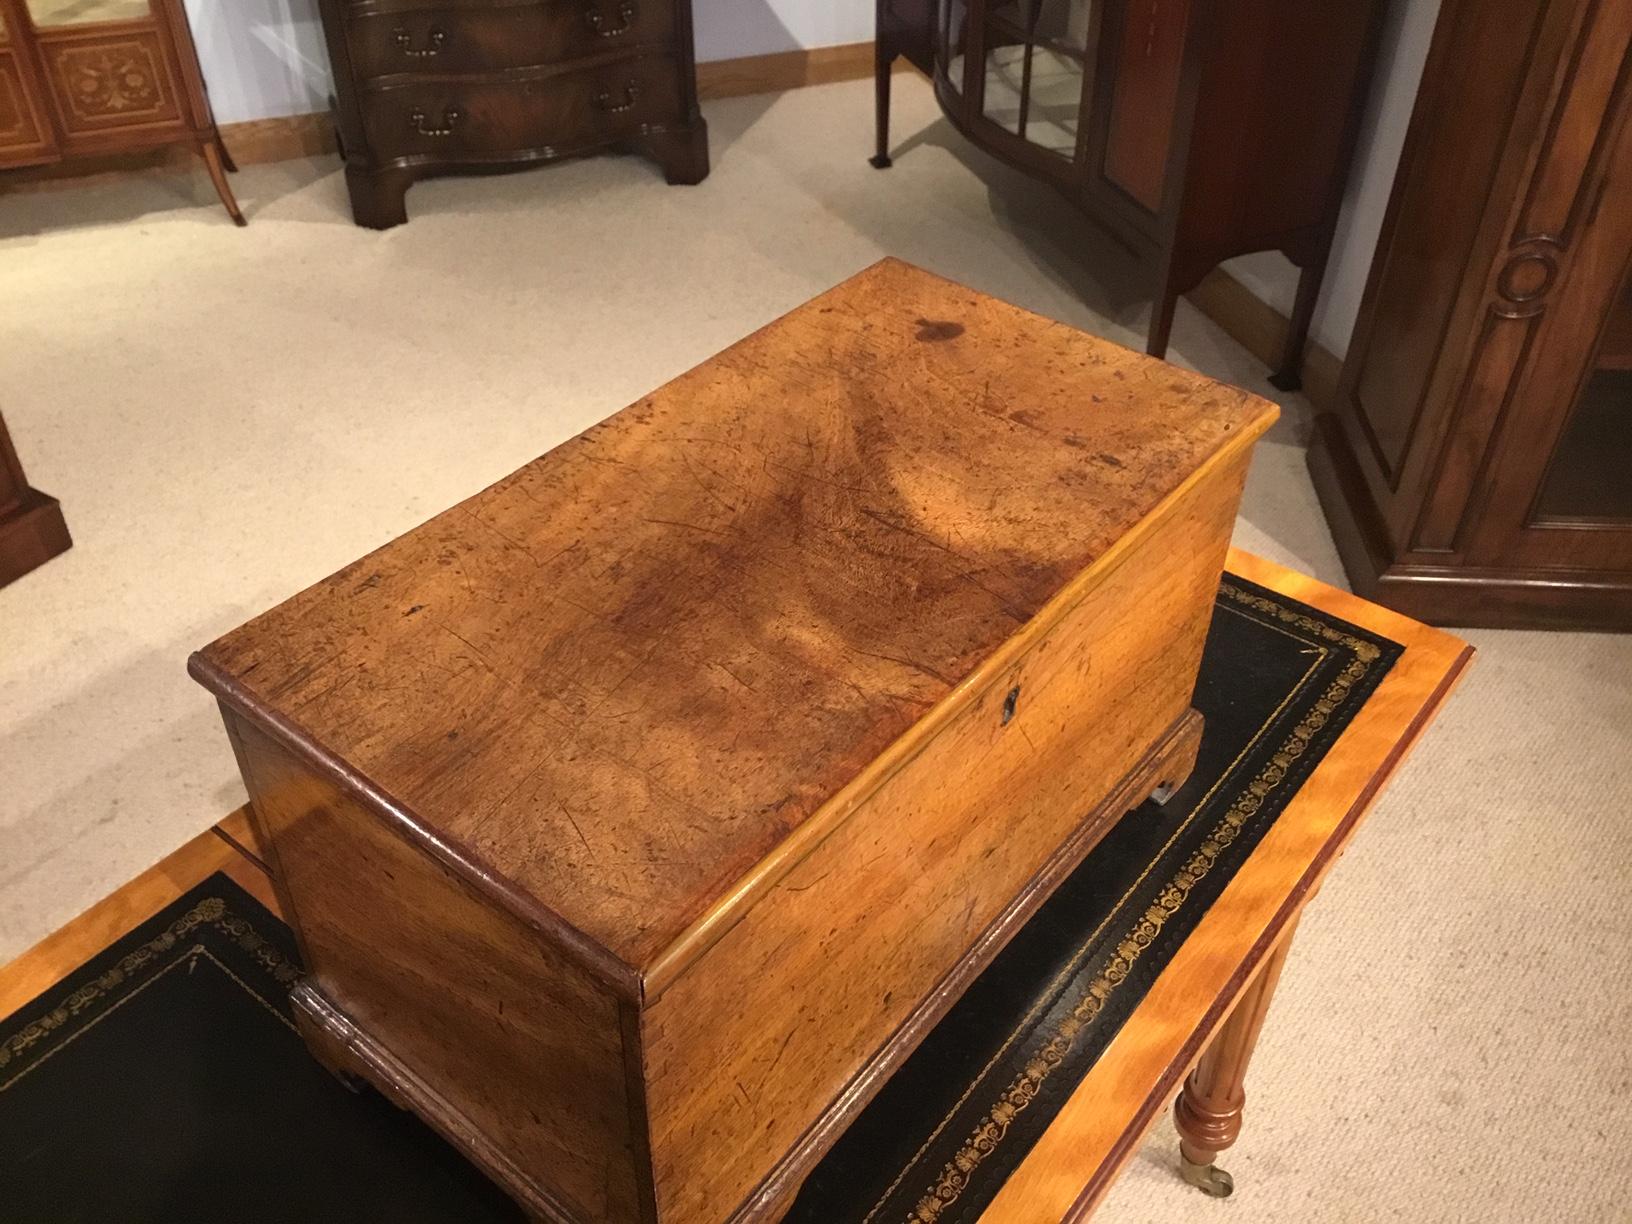 A small mahogany early 18th century antique box. Having a rectangular top of beautiful color and patination which opens to reveal a small storage area. The front with exposed dove tails indicating this may be an apprentice piece. With mahogany sides